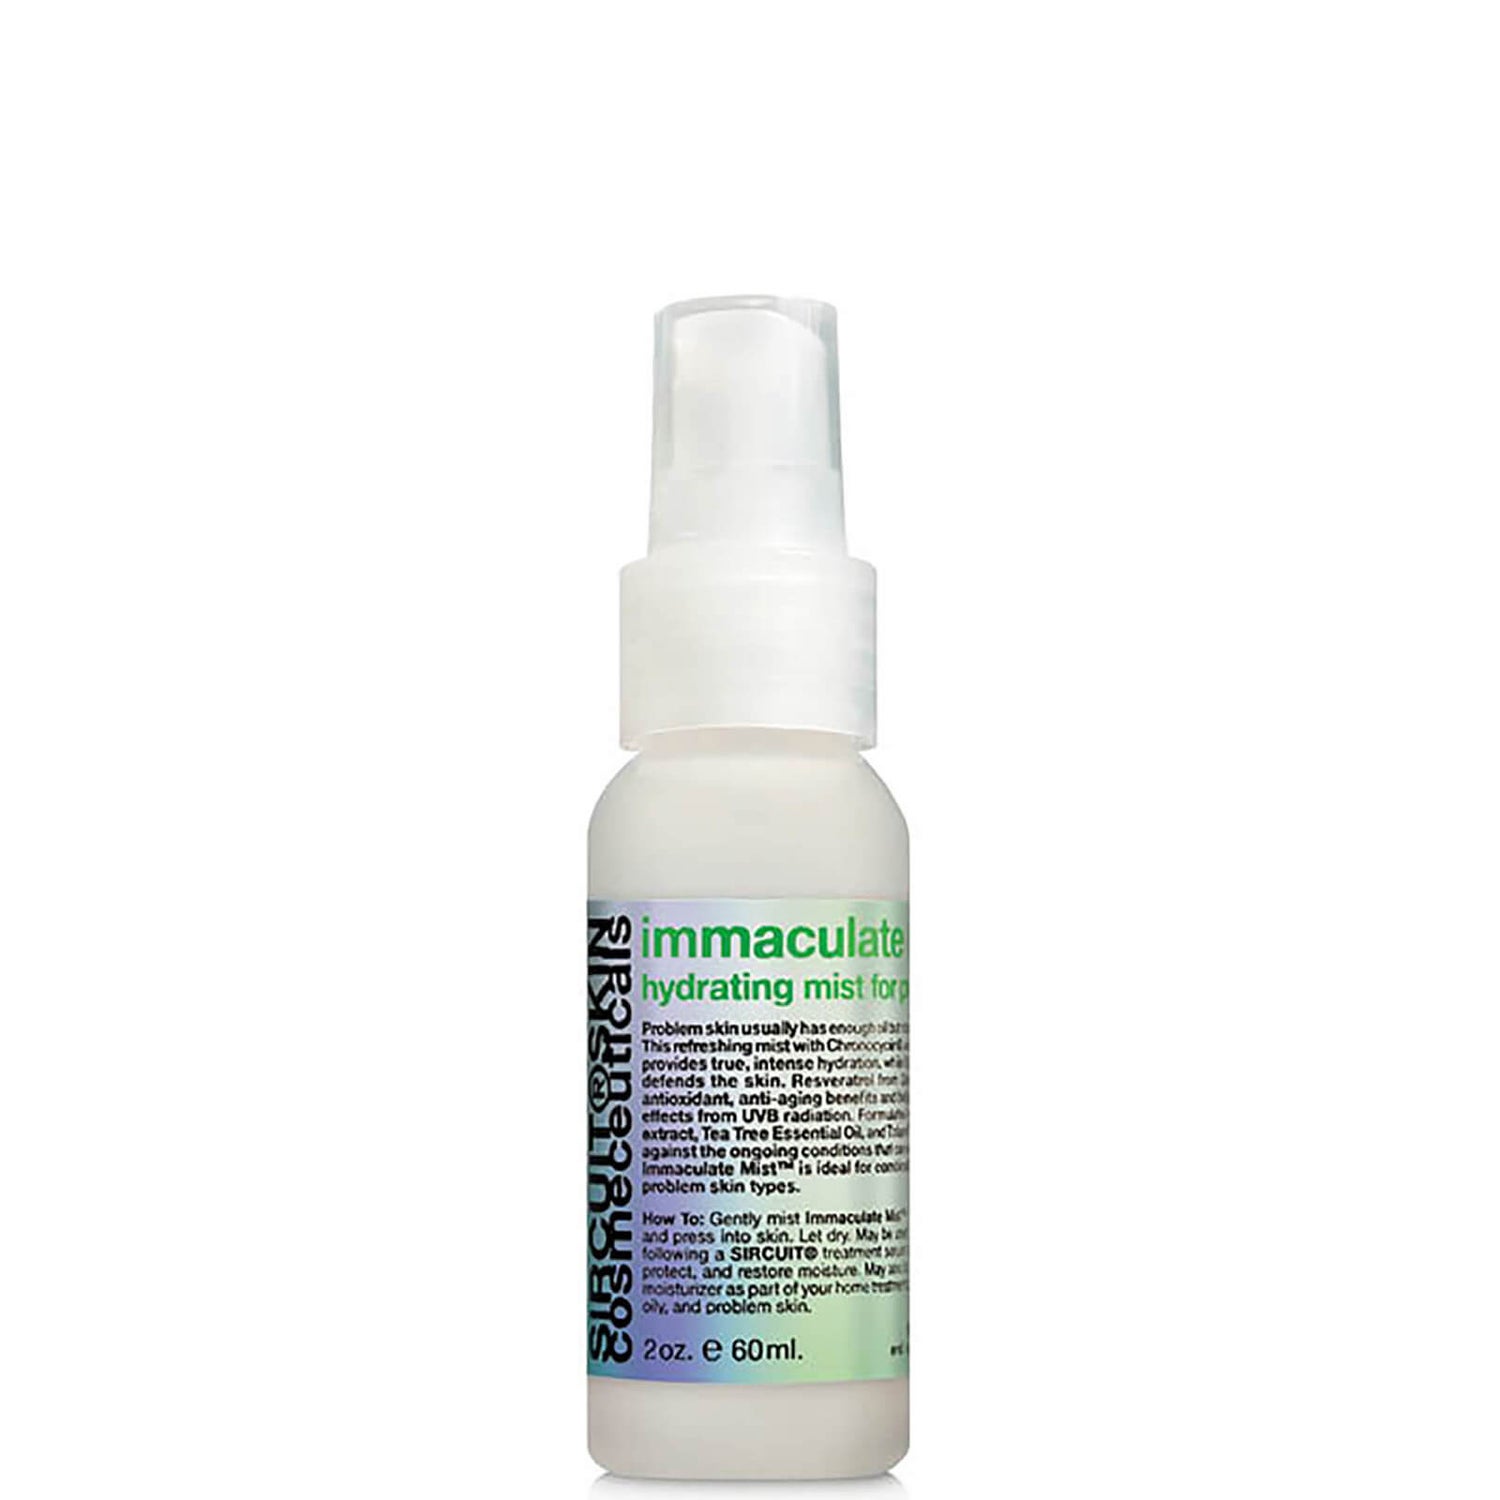 SIRCUIT Skin Immaculate Mist+ Hydrating Mist for Problem Skin